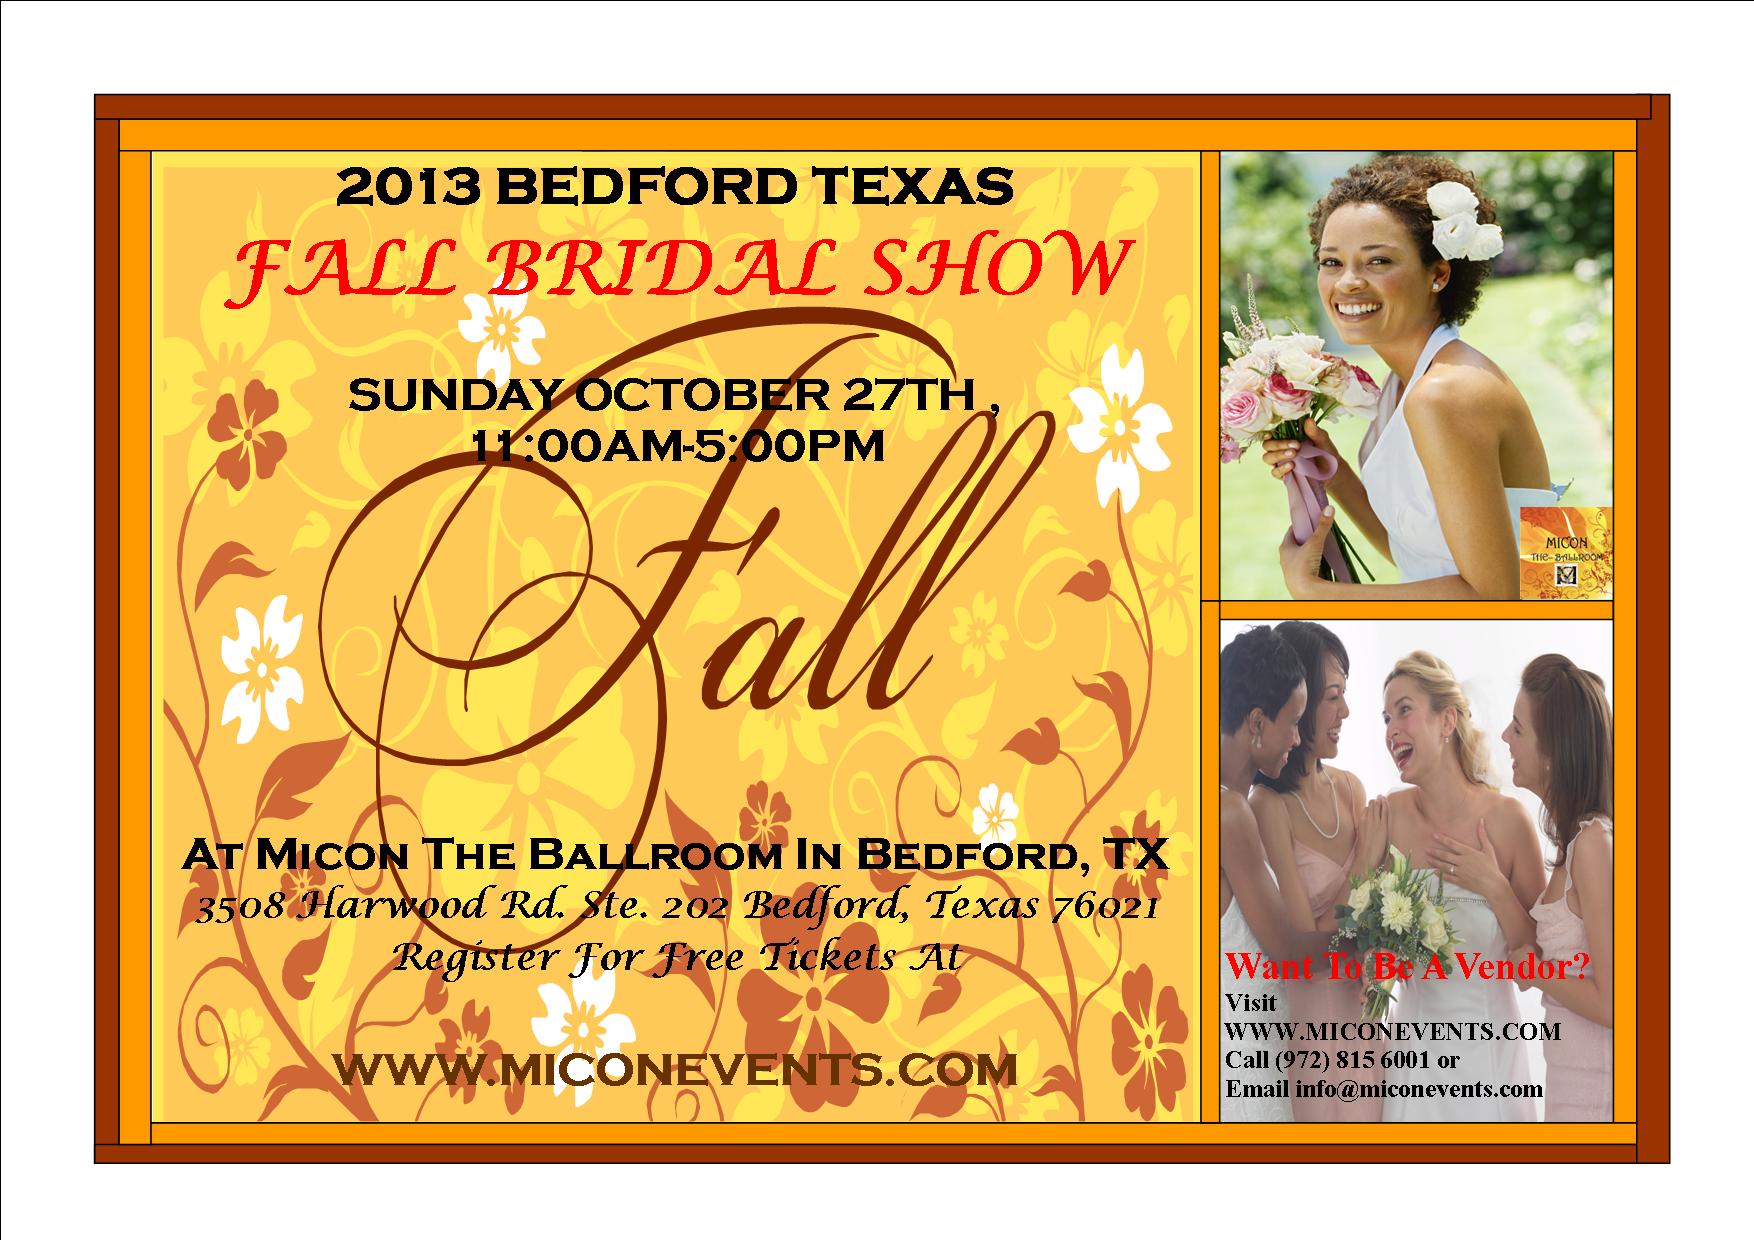 2013 Bedford Texas Fall Bridal Show Sunday October 27th 11 AM - 5 PM